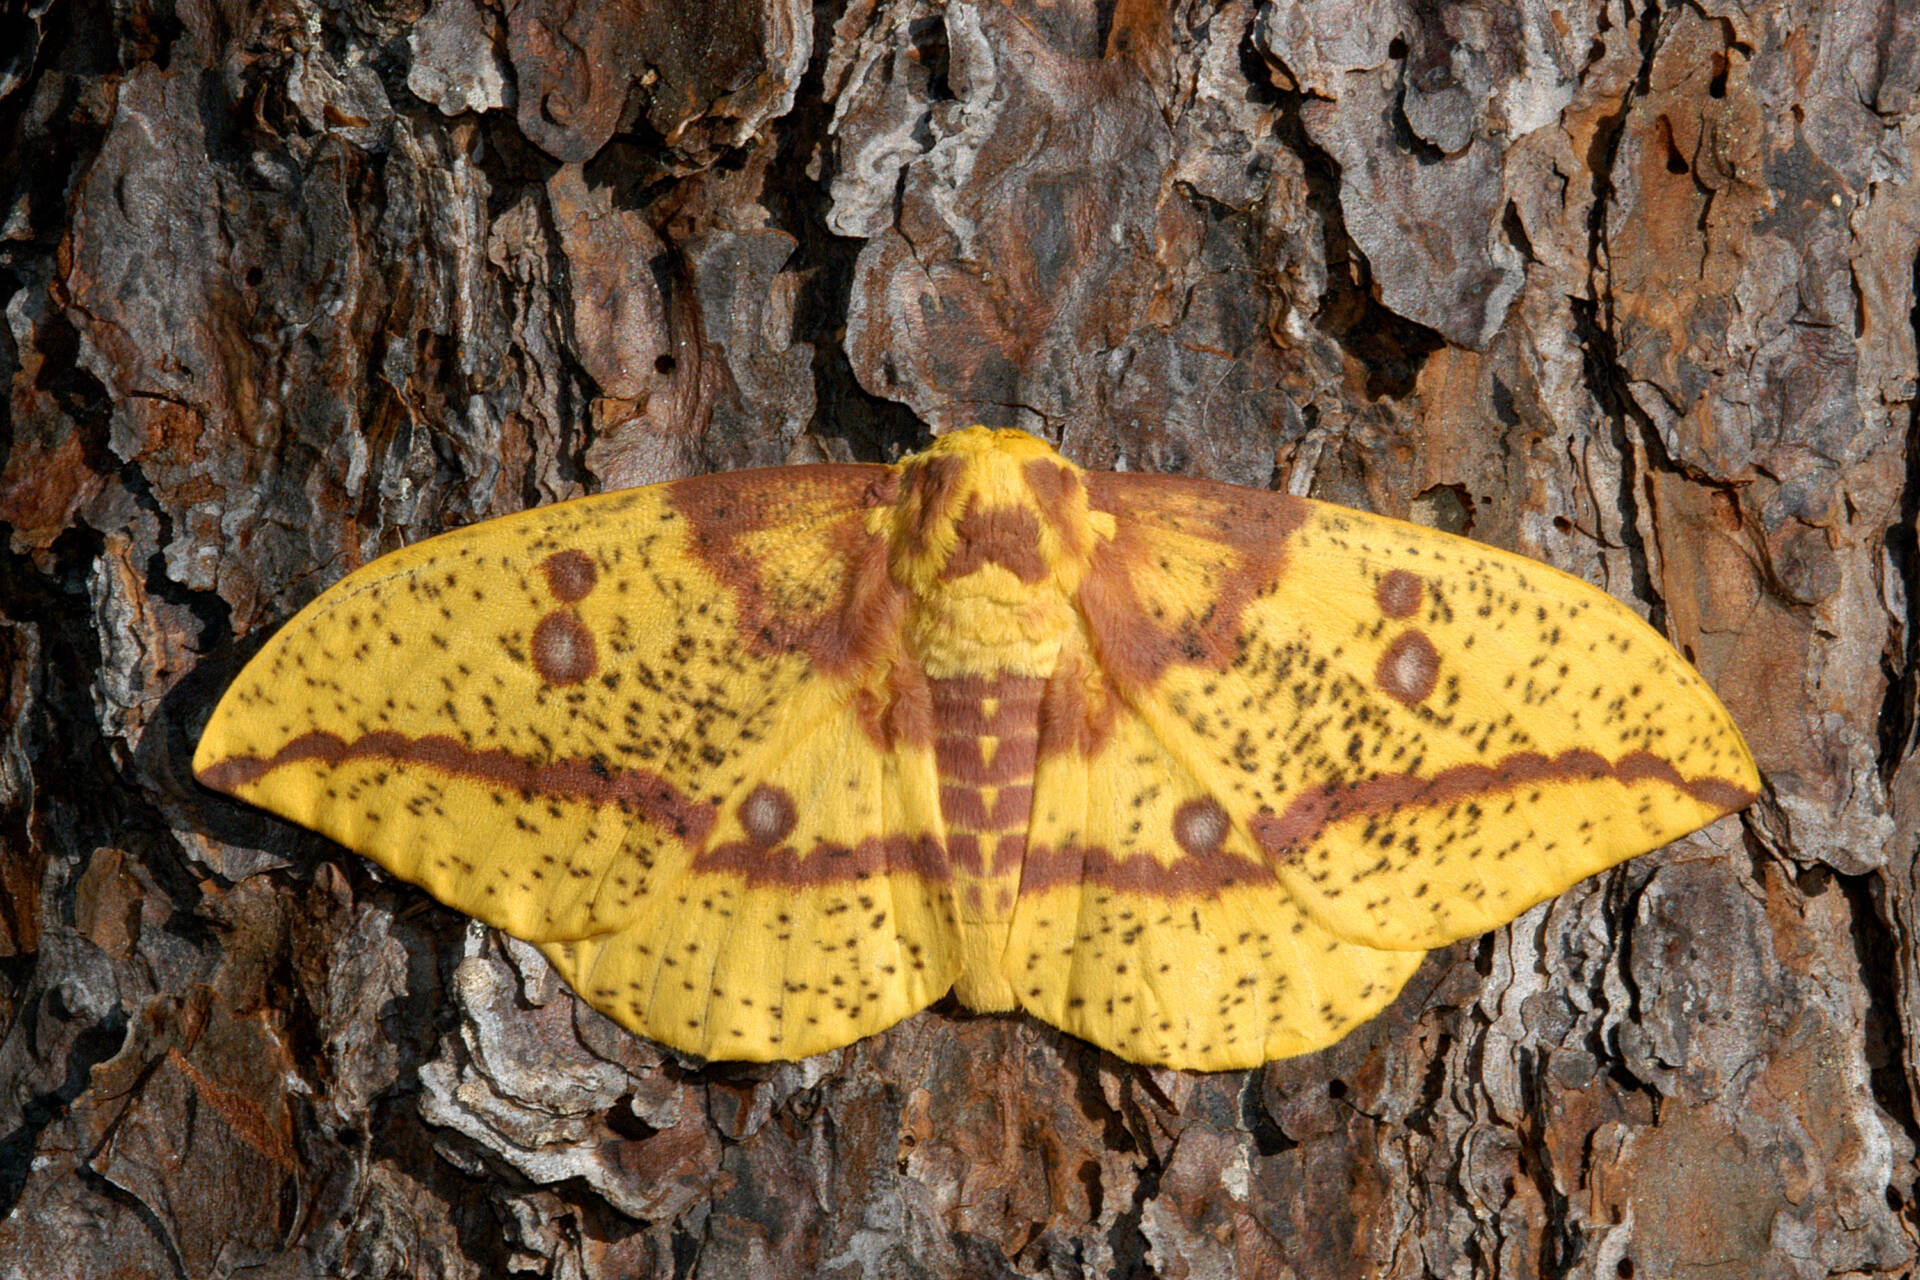 An Imperial moth. Photo by Mike Nelson